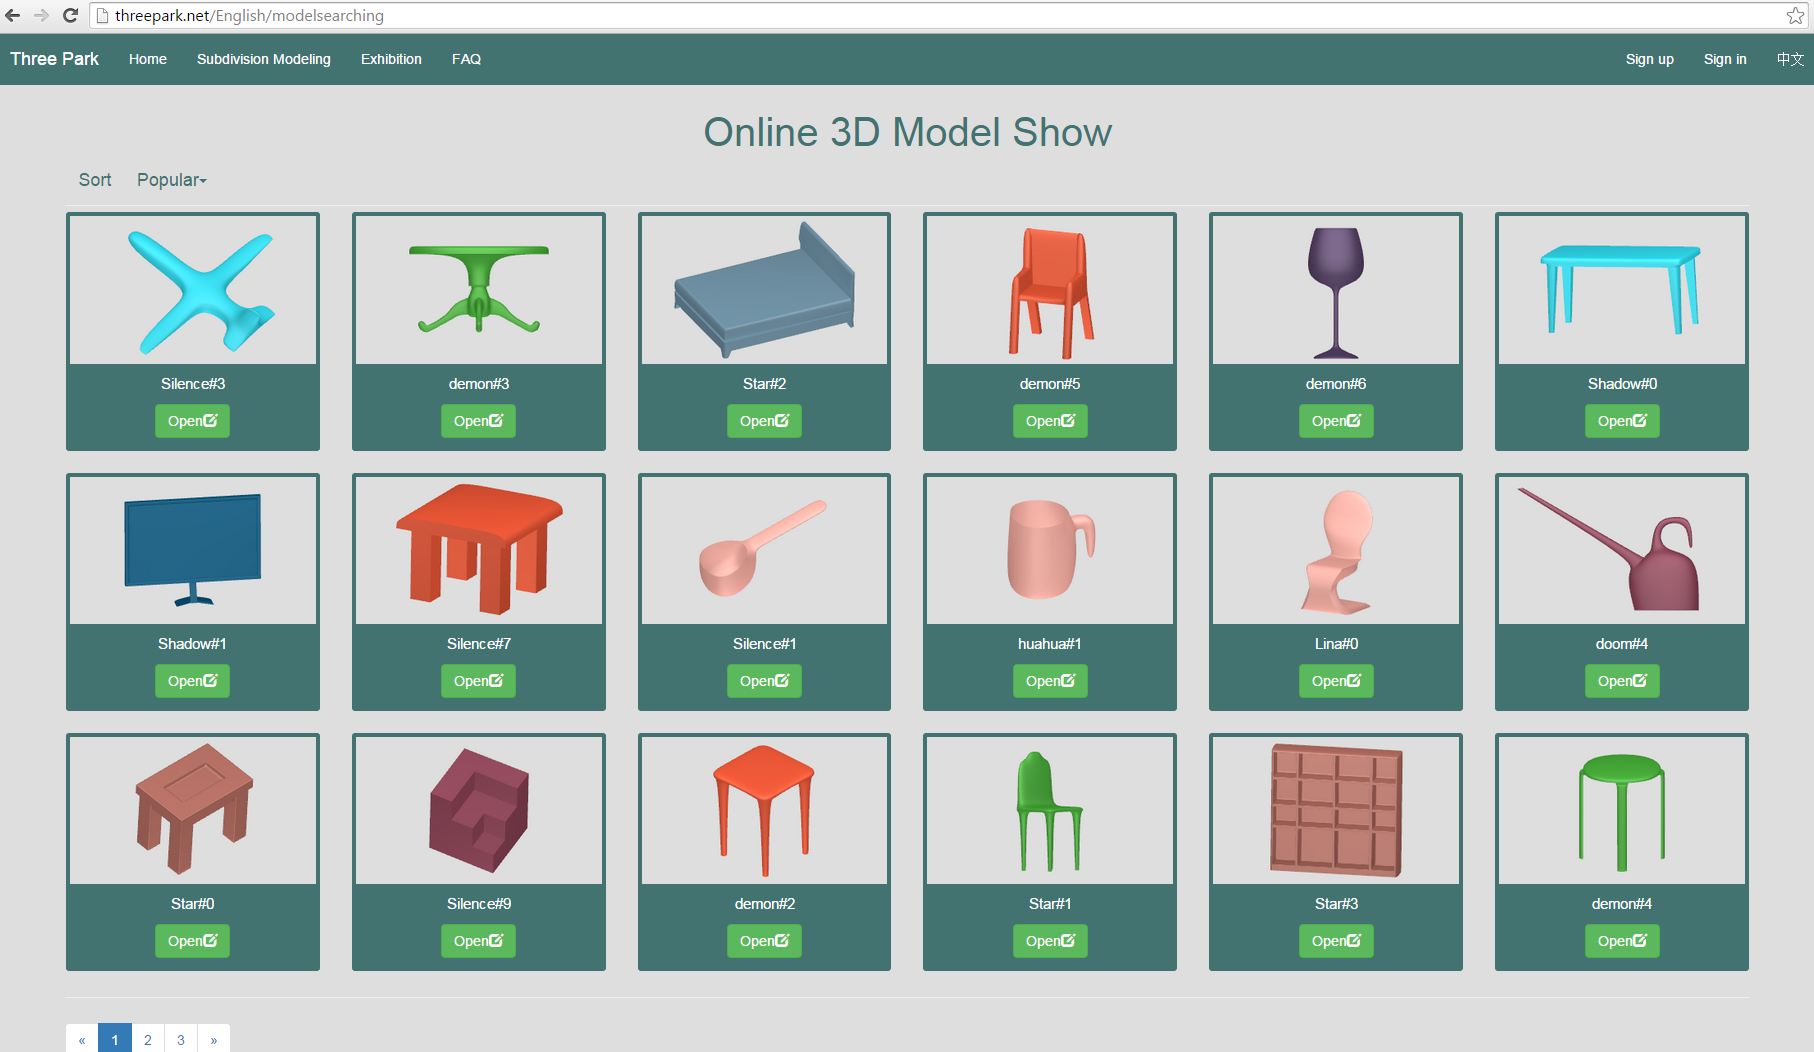 Free Modeling for 3D Printing - CAD Show and tell - Talk Manufacturing |